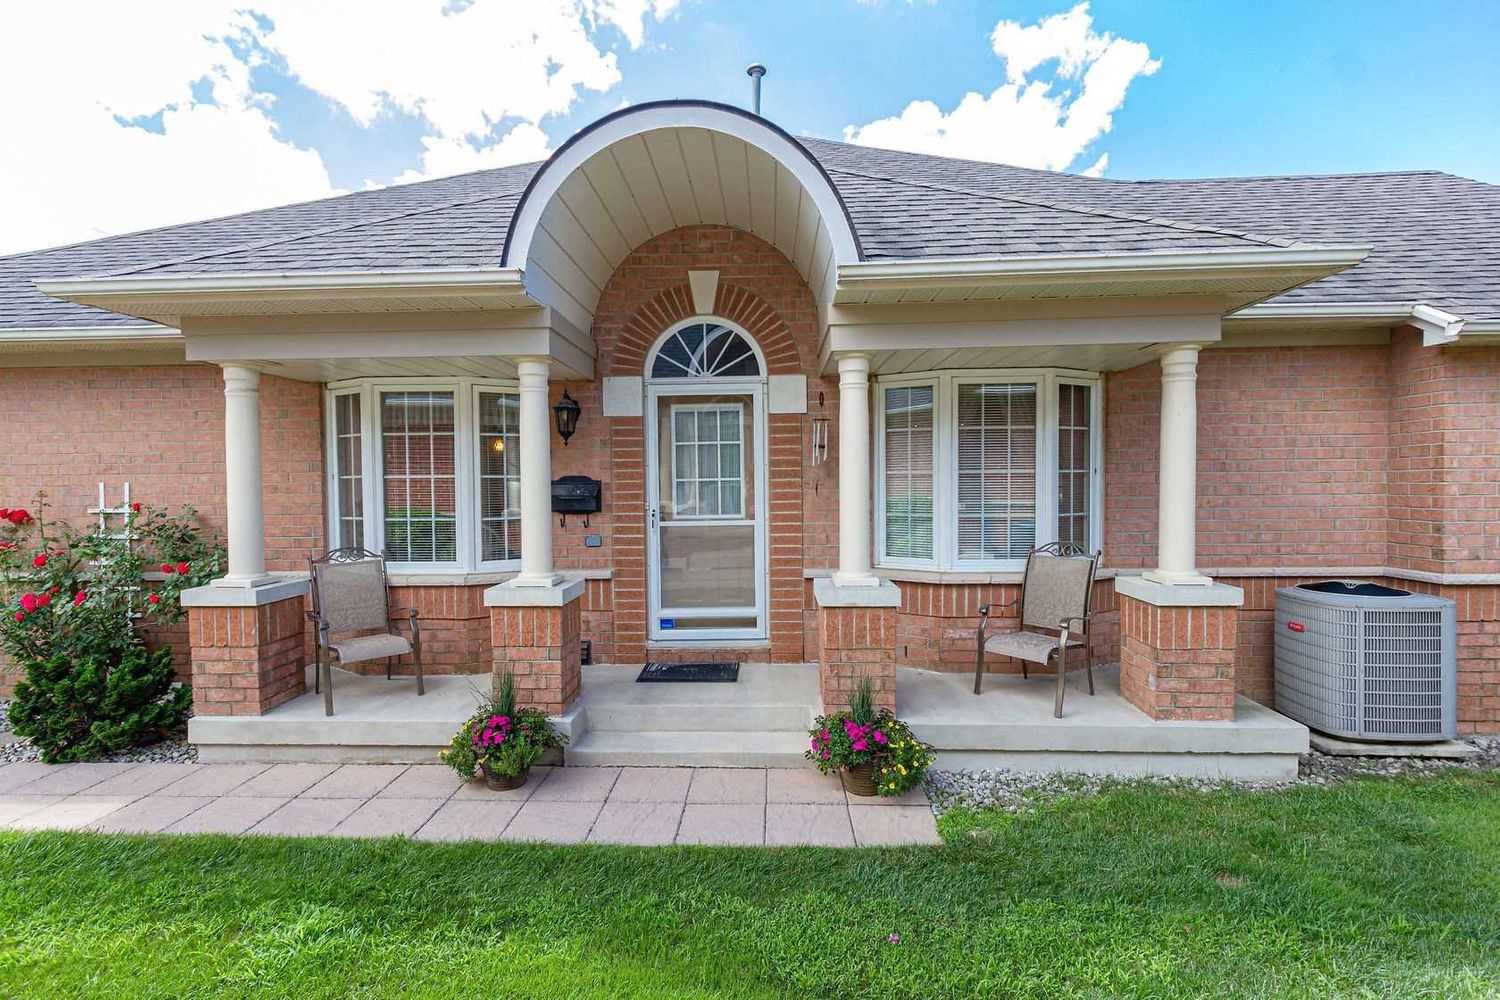 2175 Country Club Drive. Country Club Manor Townhomes is located in  Burlington, Toronto - image #2 of 2